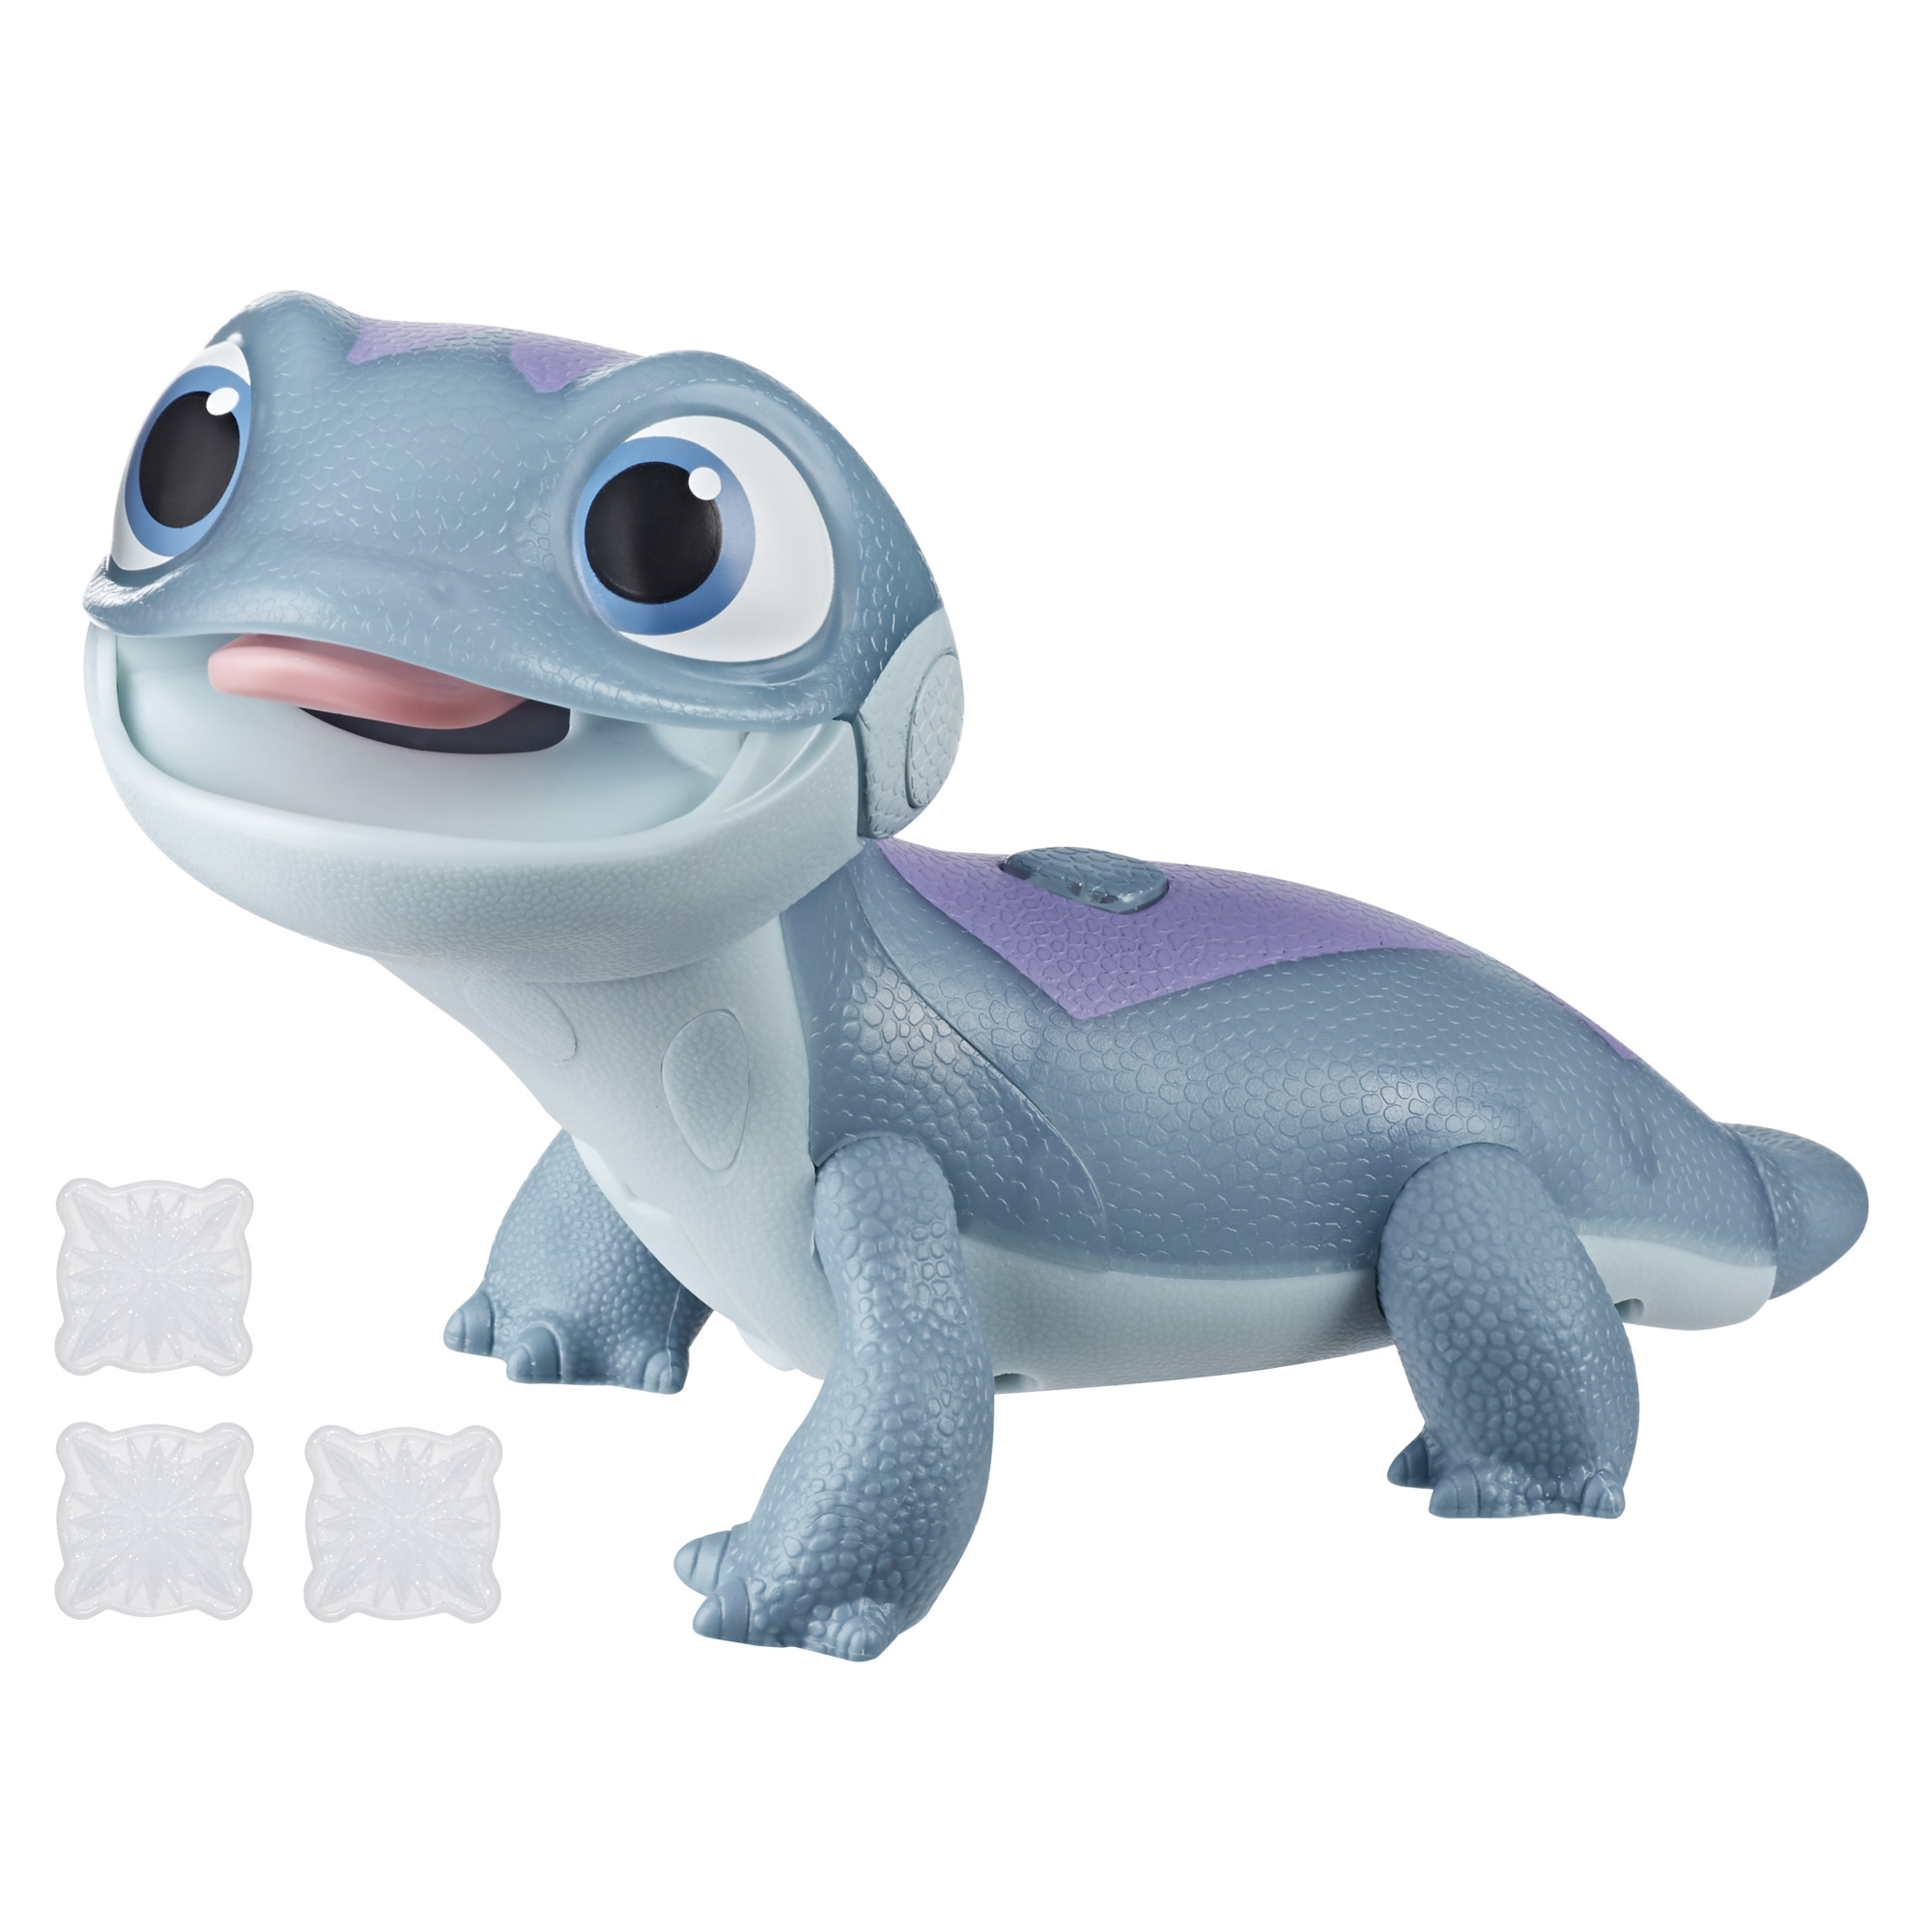 Disney Frozen 2 Fire Spirit's Snowy Snack, Salamander Toy with Lights - image 1 of 9